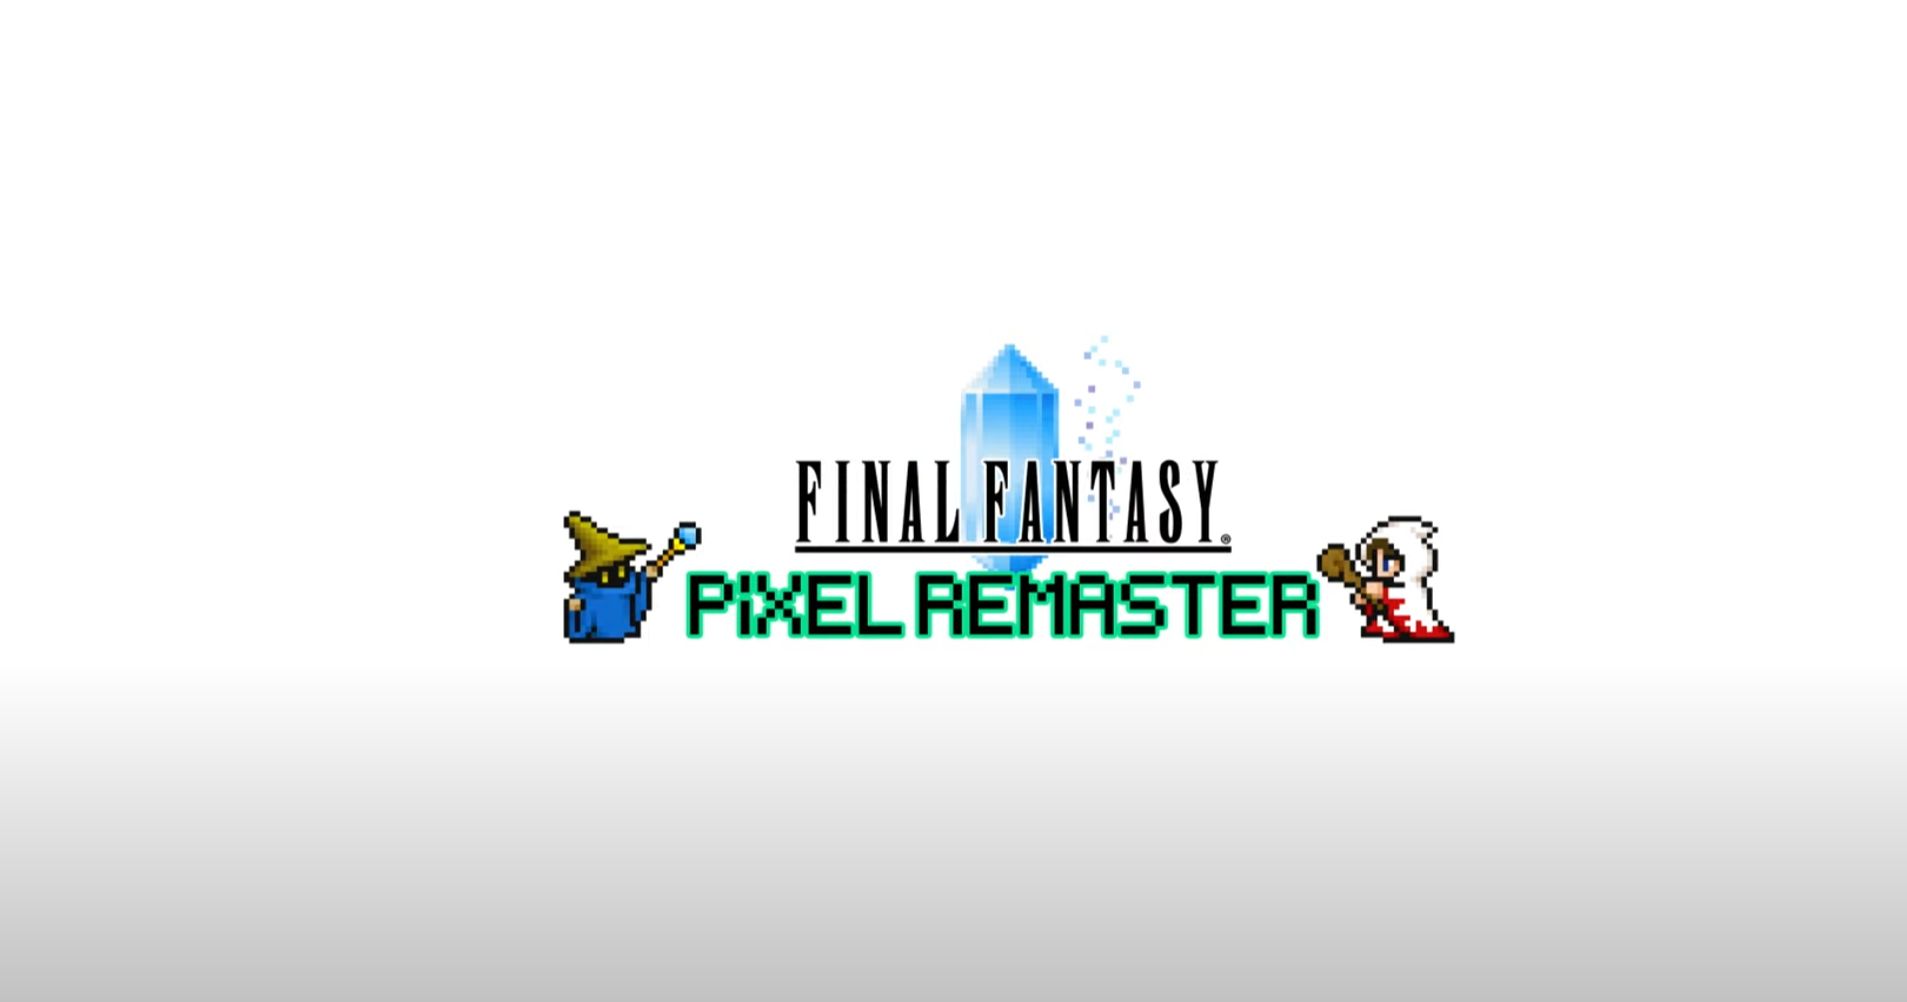 Image for Final Fantasy Pixel Remaster series brings Final Fantasy 1-6 to Steam and mobile